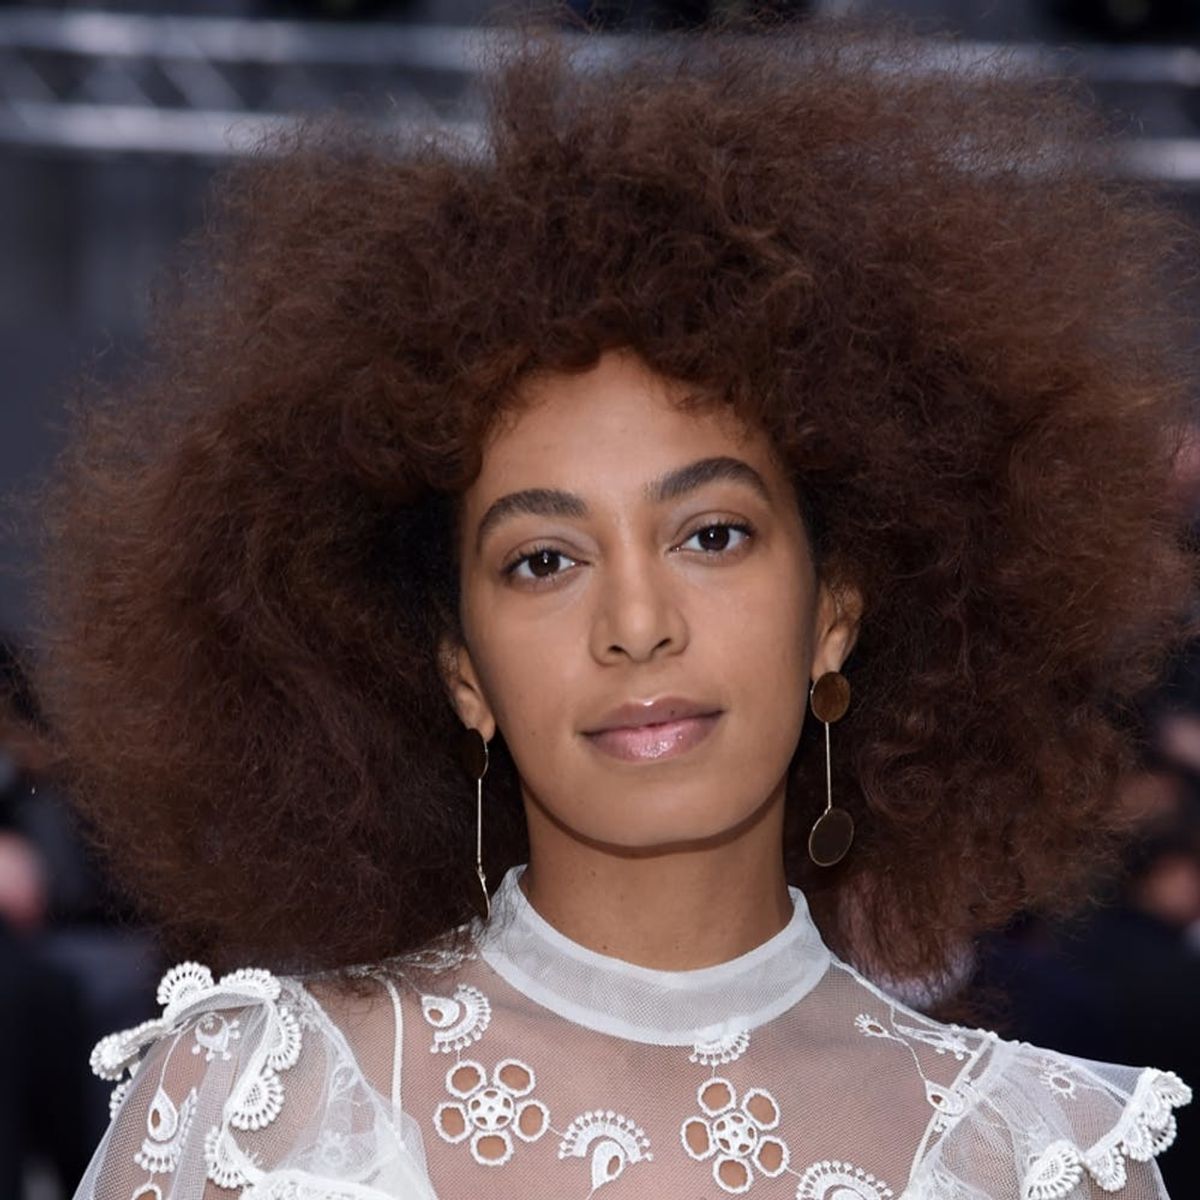 Solange Knowles Got Real About Her Skin Woes in This Instagram Post